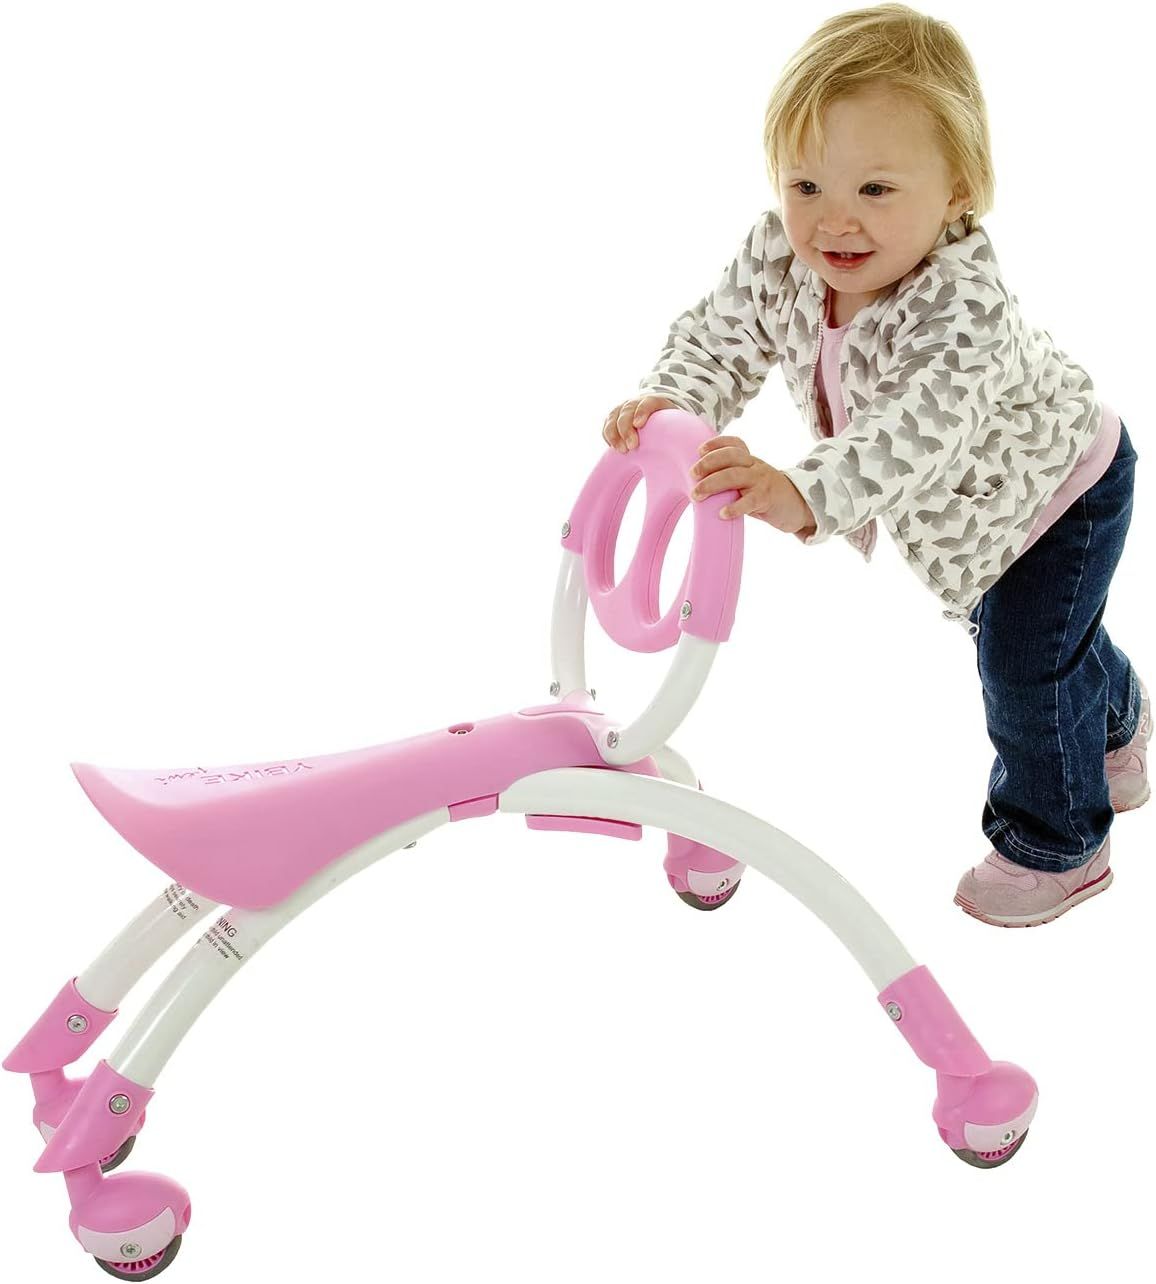 Pewi Walking Ride On Toy - From Baby Walker to Toddler Ride On for Ages 9 Months to 3 Years Old | Amazon (US)